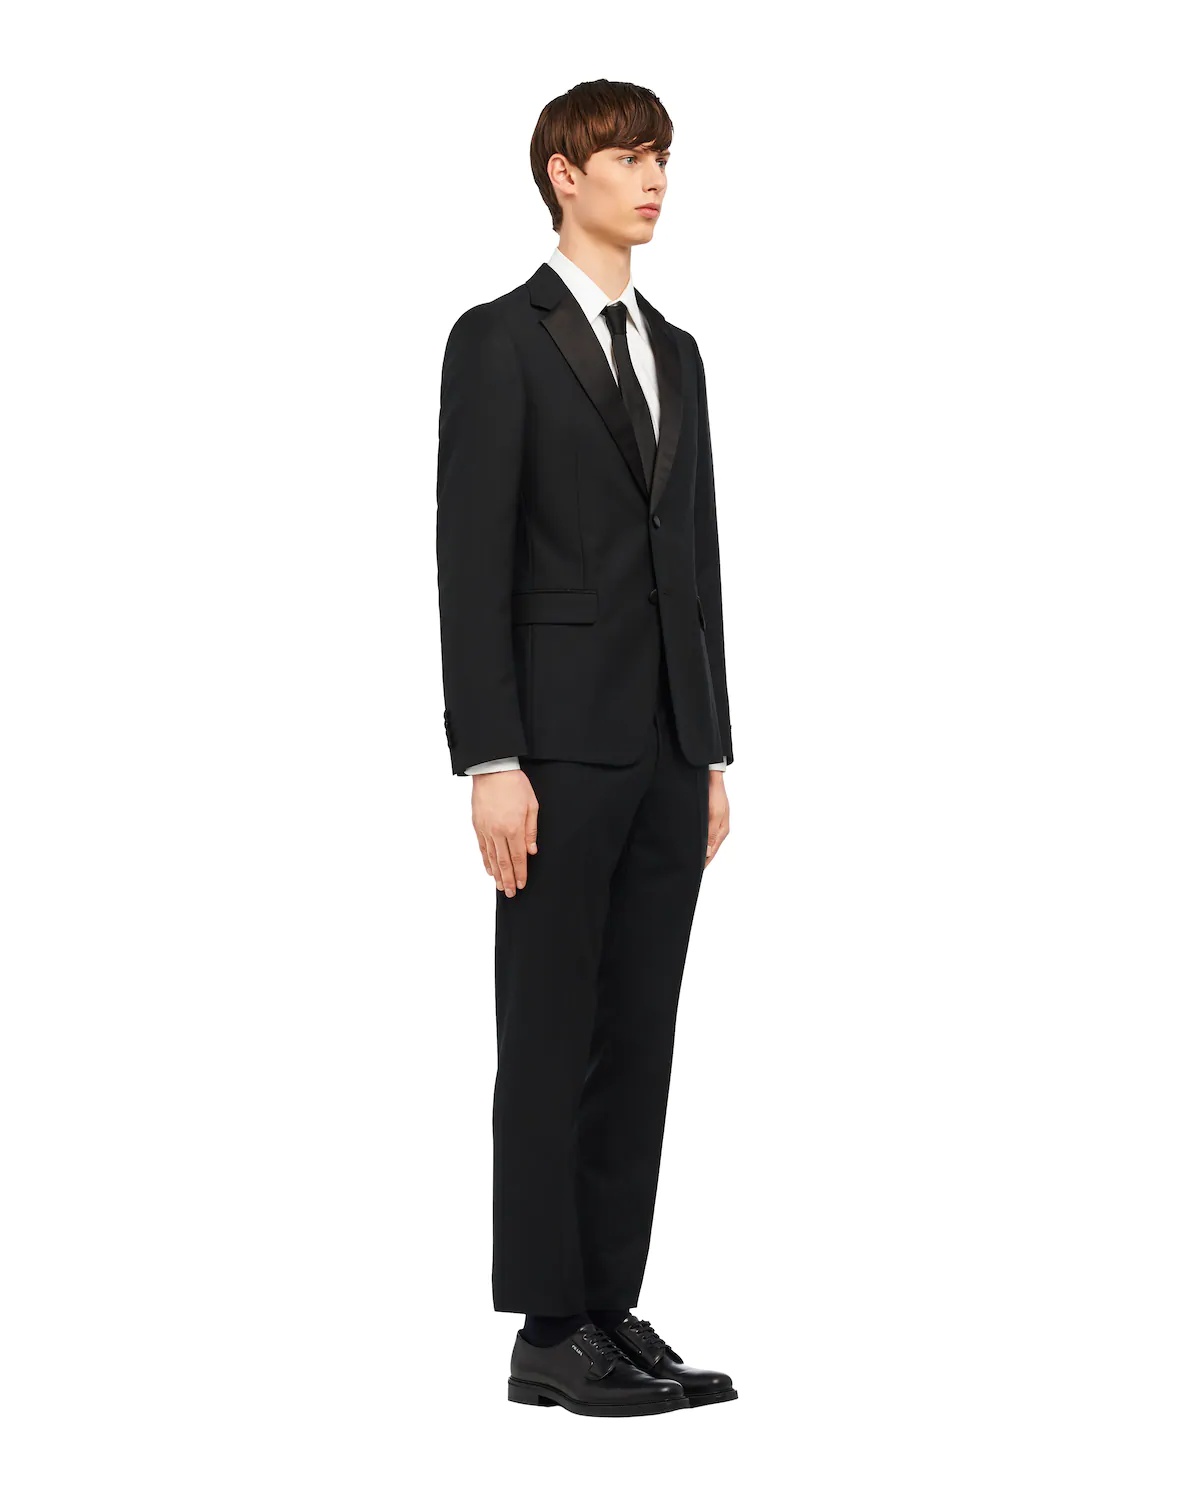 Singled-breasted two-button wool mohair tuxedo - 3